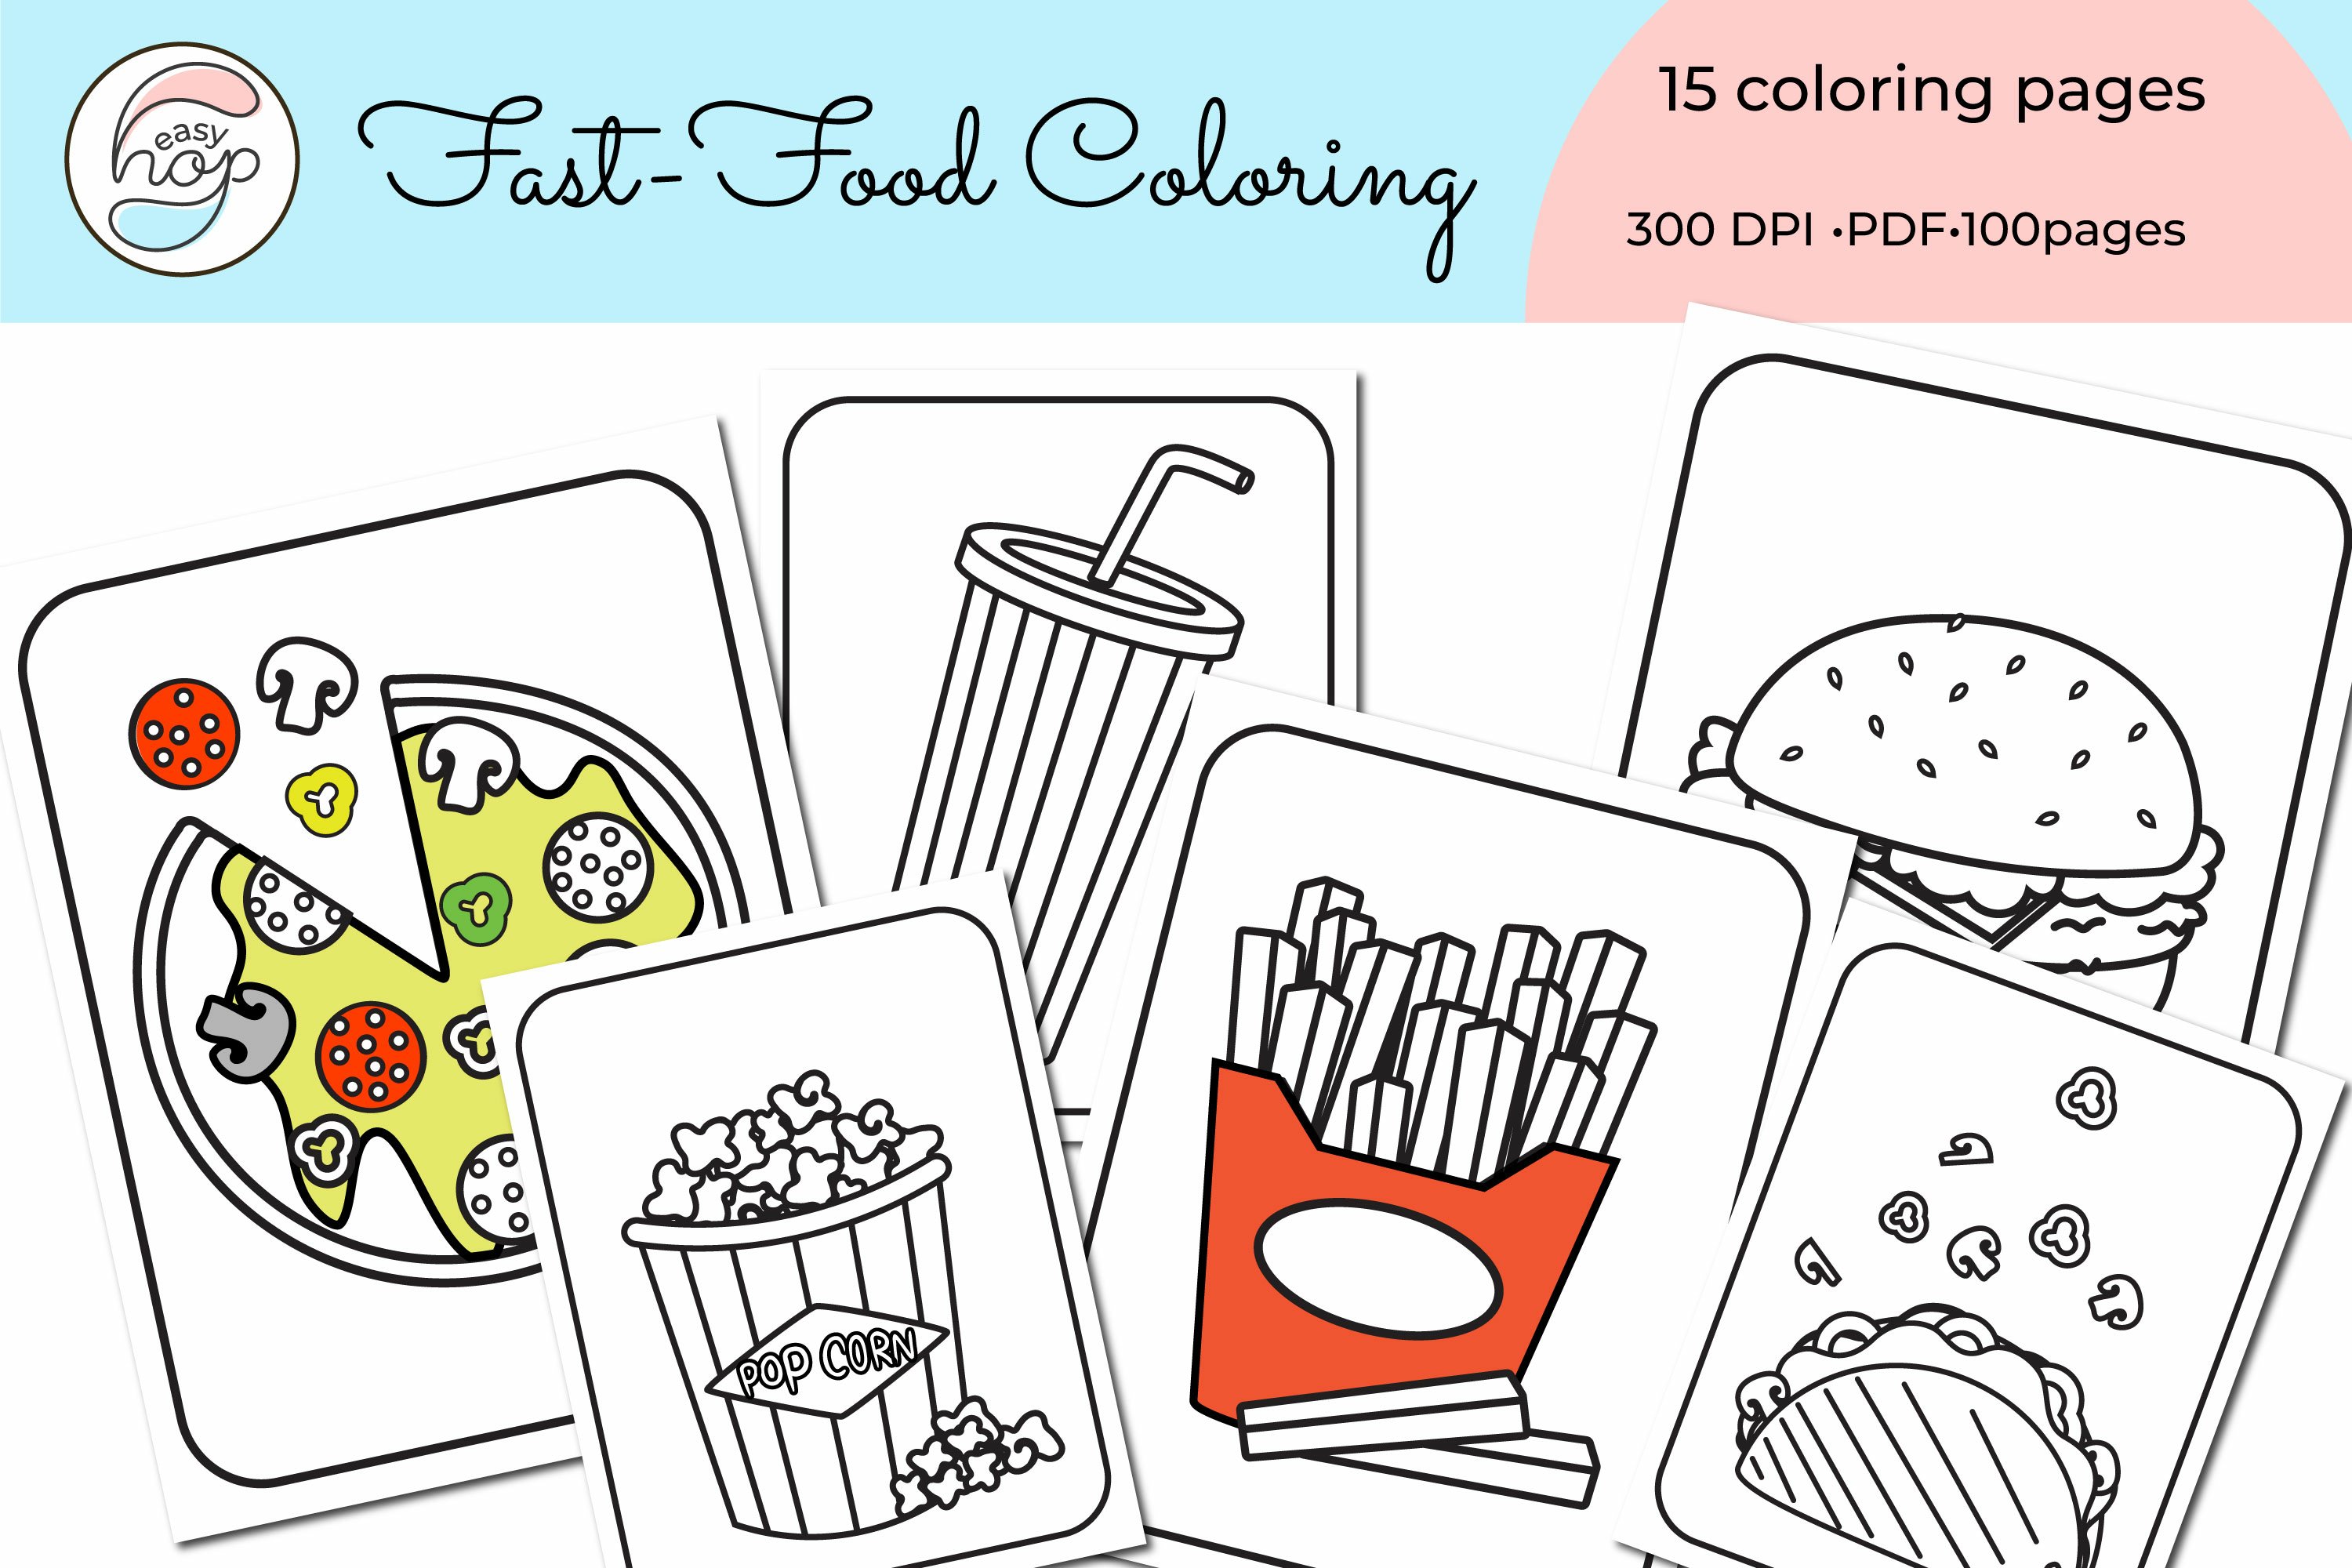 Fast food coloring pages set